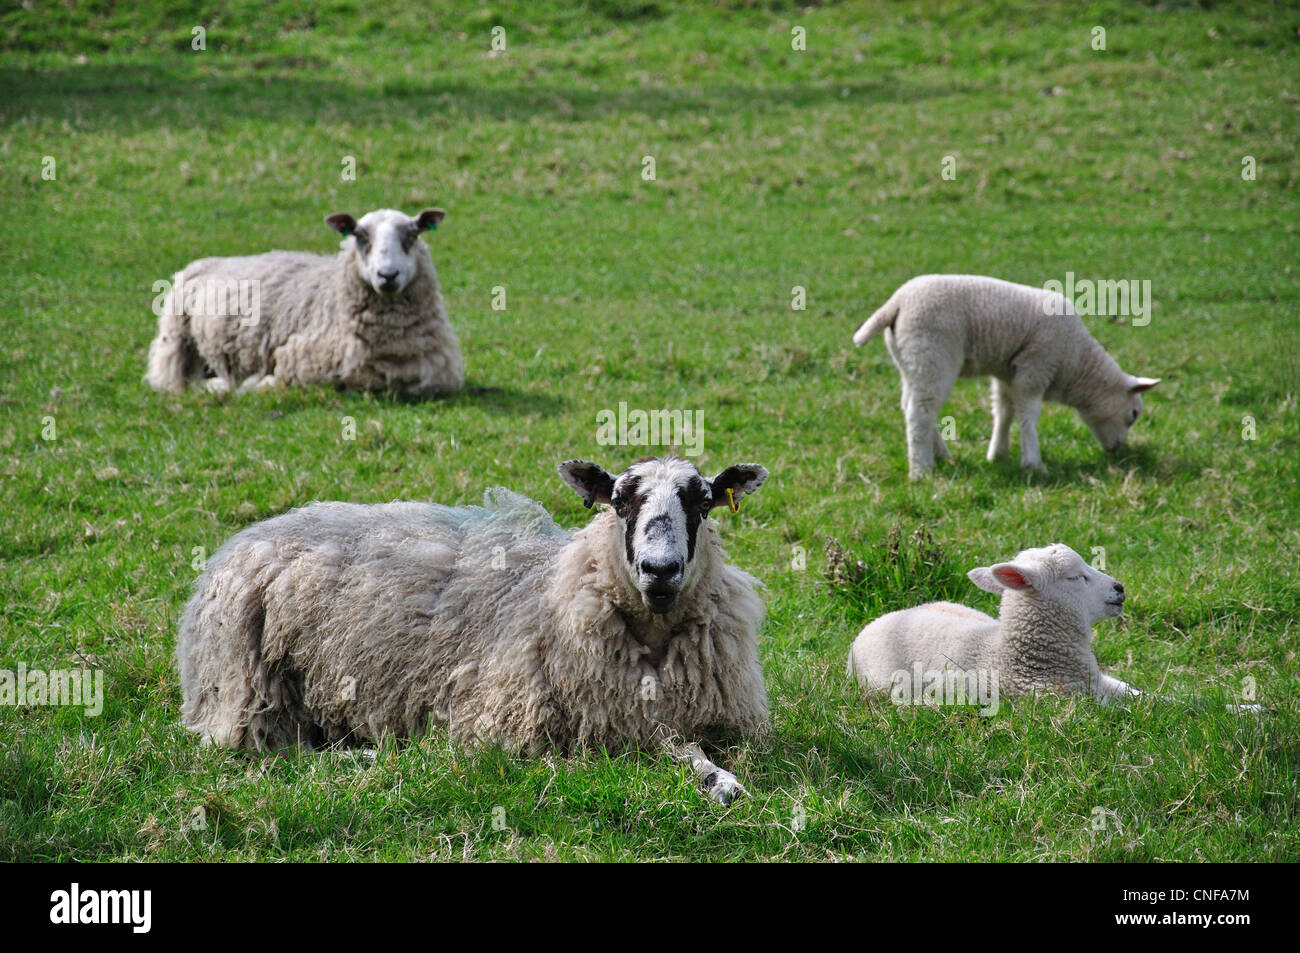 Sheep with lambs in field, Stanwell, Surrey, England, United Kingdom Stock Photo